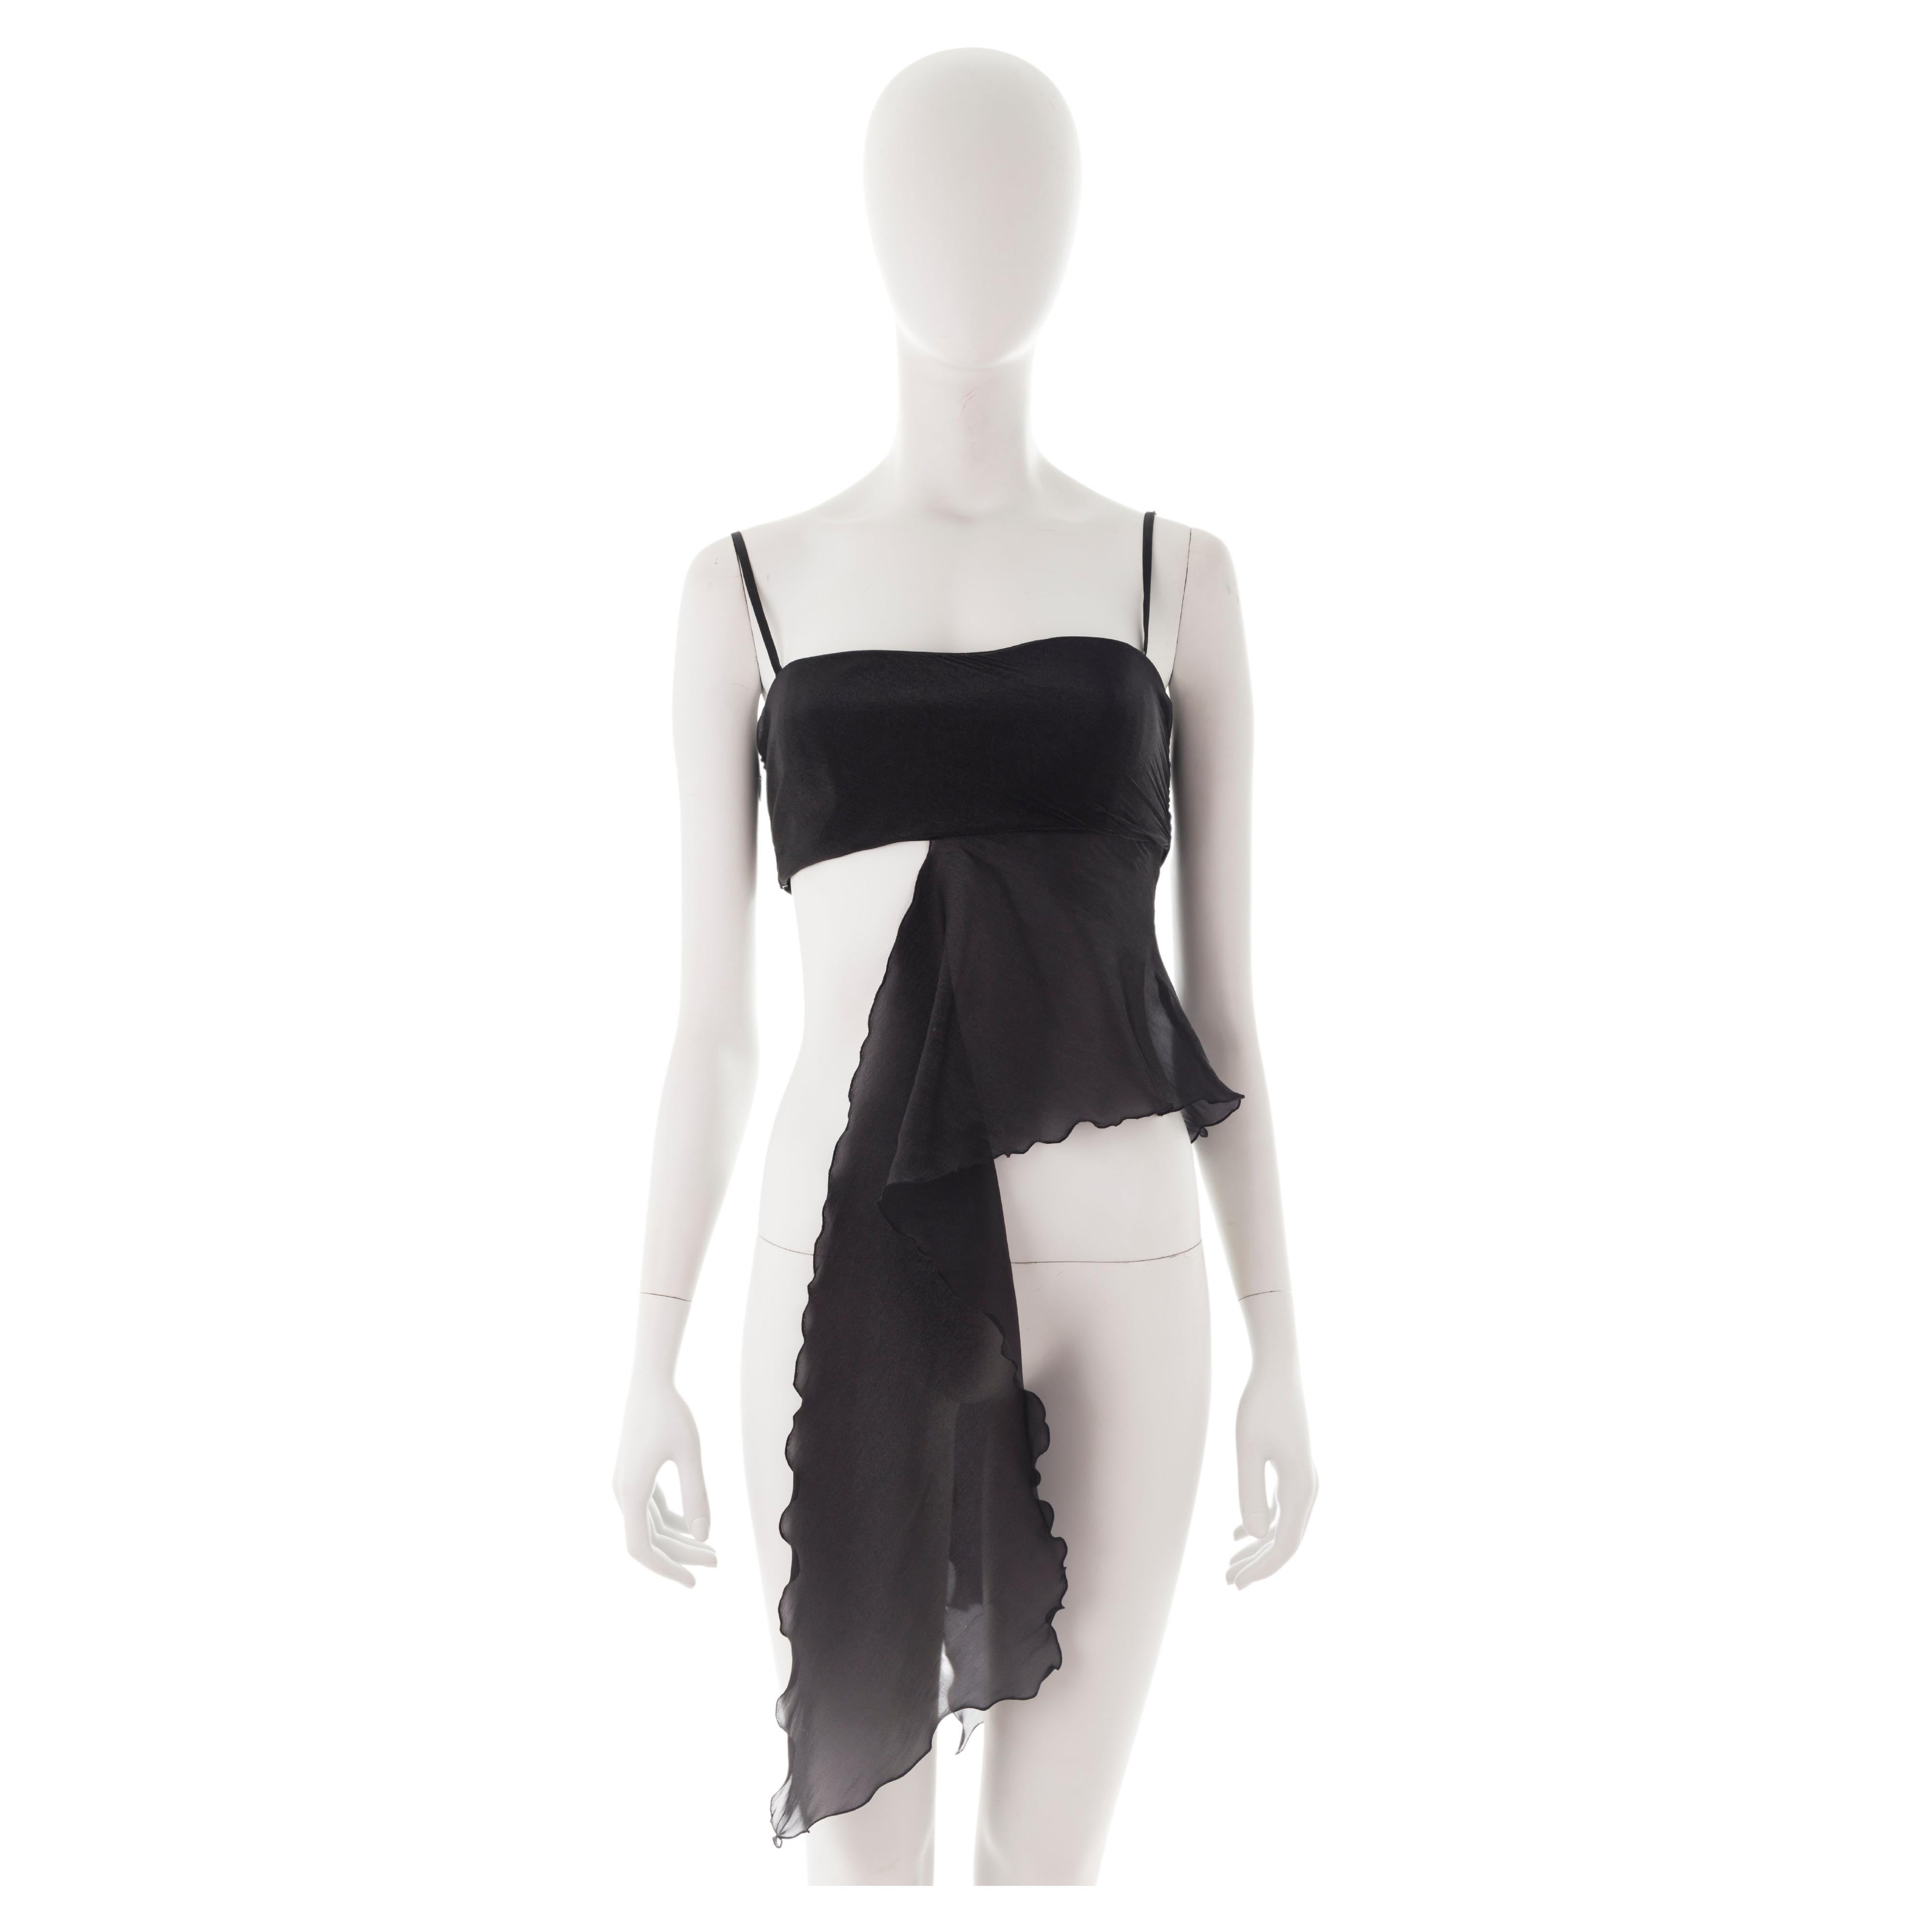 - Emporio Armani by Giorgio Armani
- Sold by Gold Palms Vintage
- Spring/Summer 2001 
- Silk black tube top 
- Spaghetti straps
- Black silk chiffon back and front maxi ruffle 
- Side zipper with hook
- Size 40
